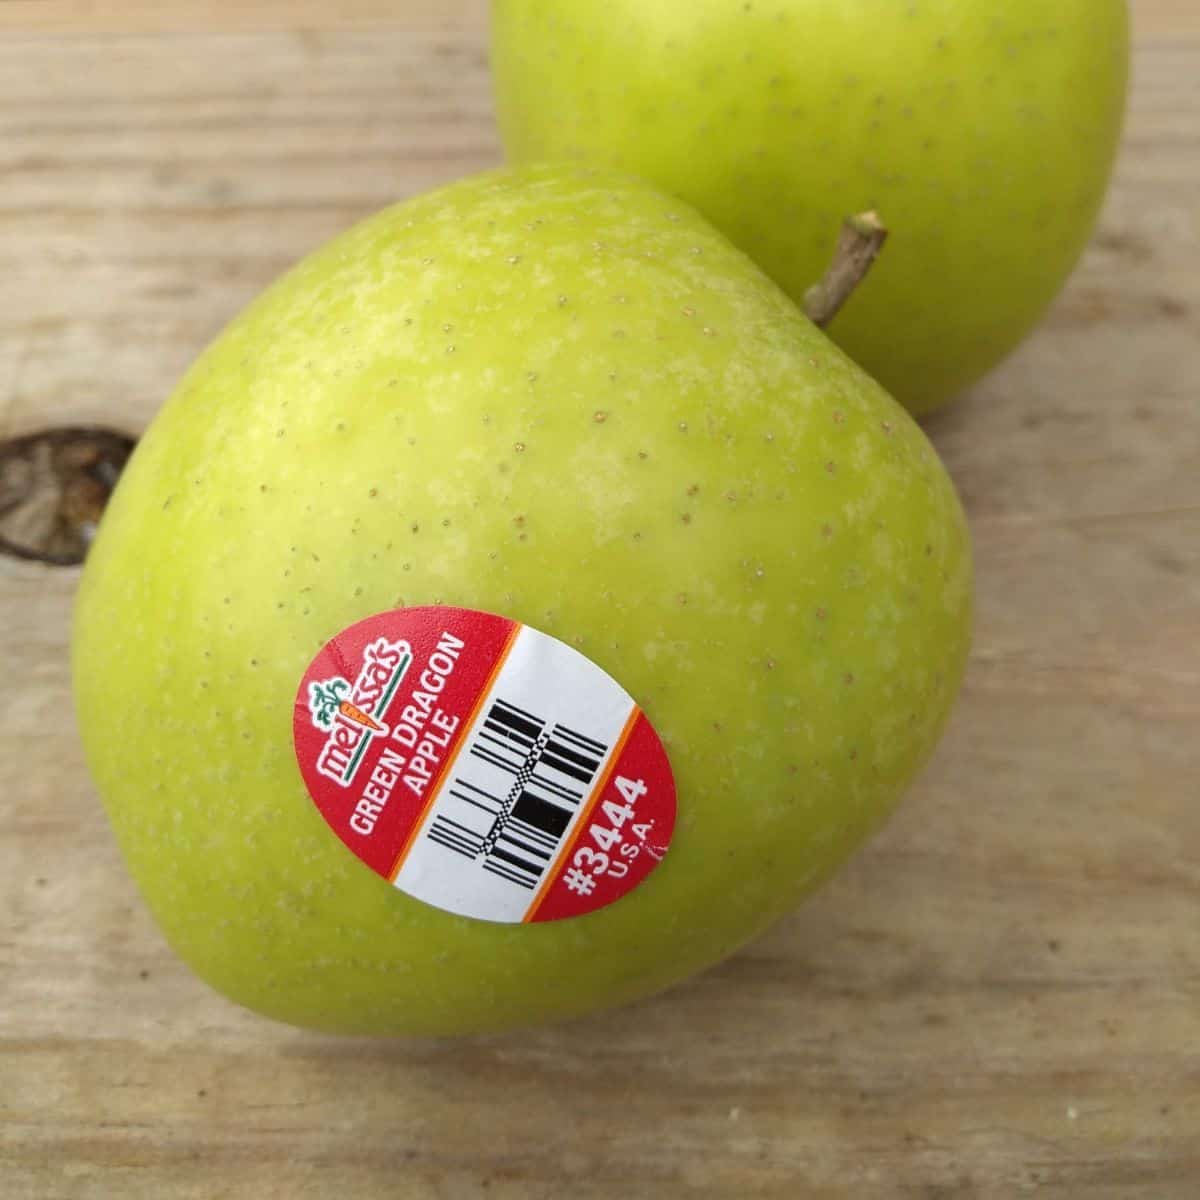 A Green Dragon apple with the sticker on it sitting on a wood table.